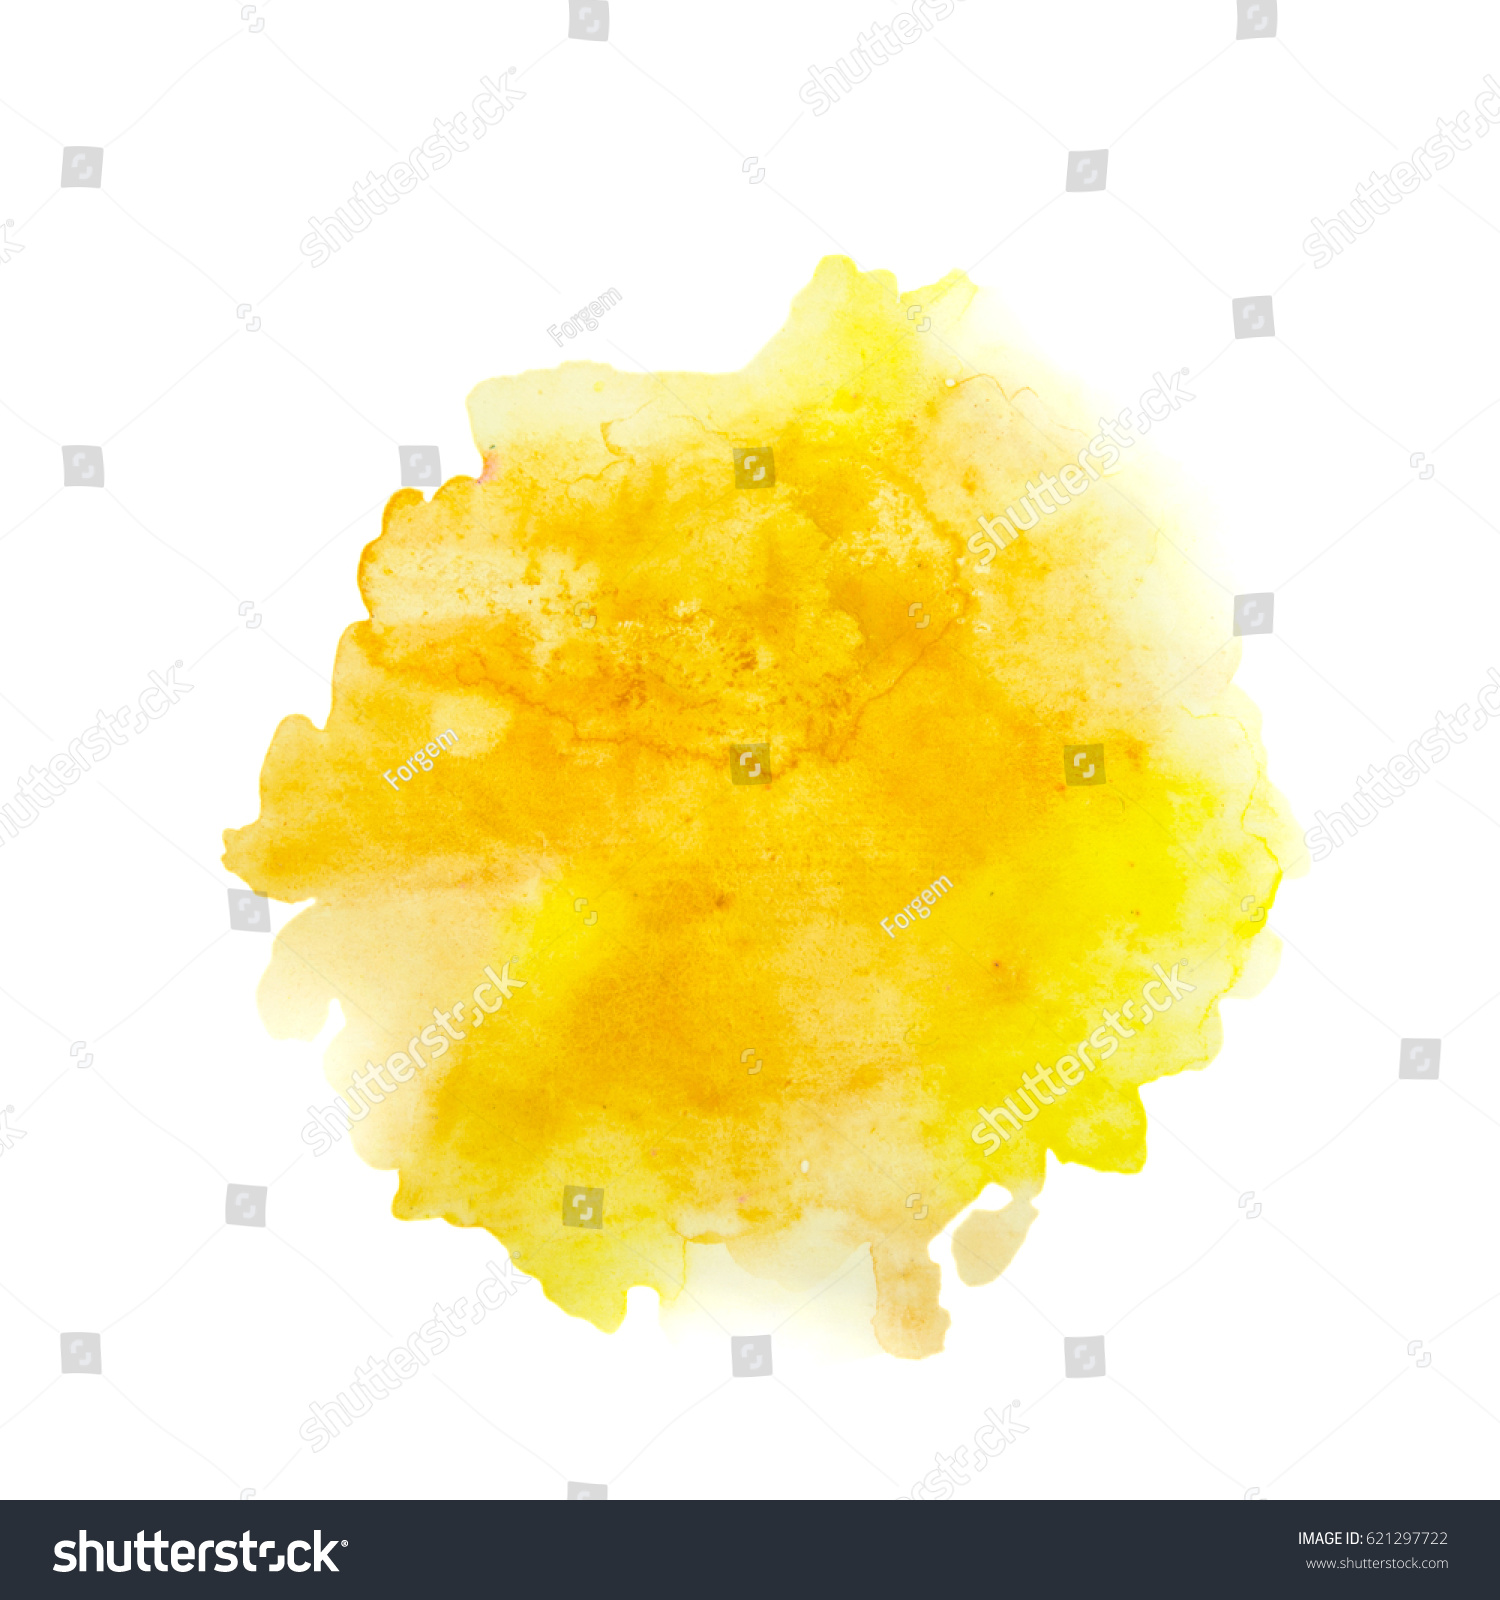 Color, yellow - orange splash watercolor hand painted isolated on white background, artistic decoration or background #621297722